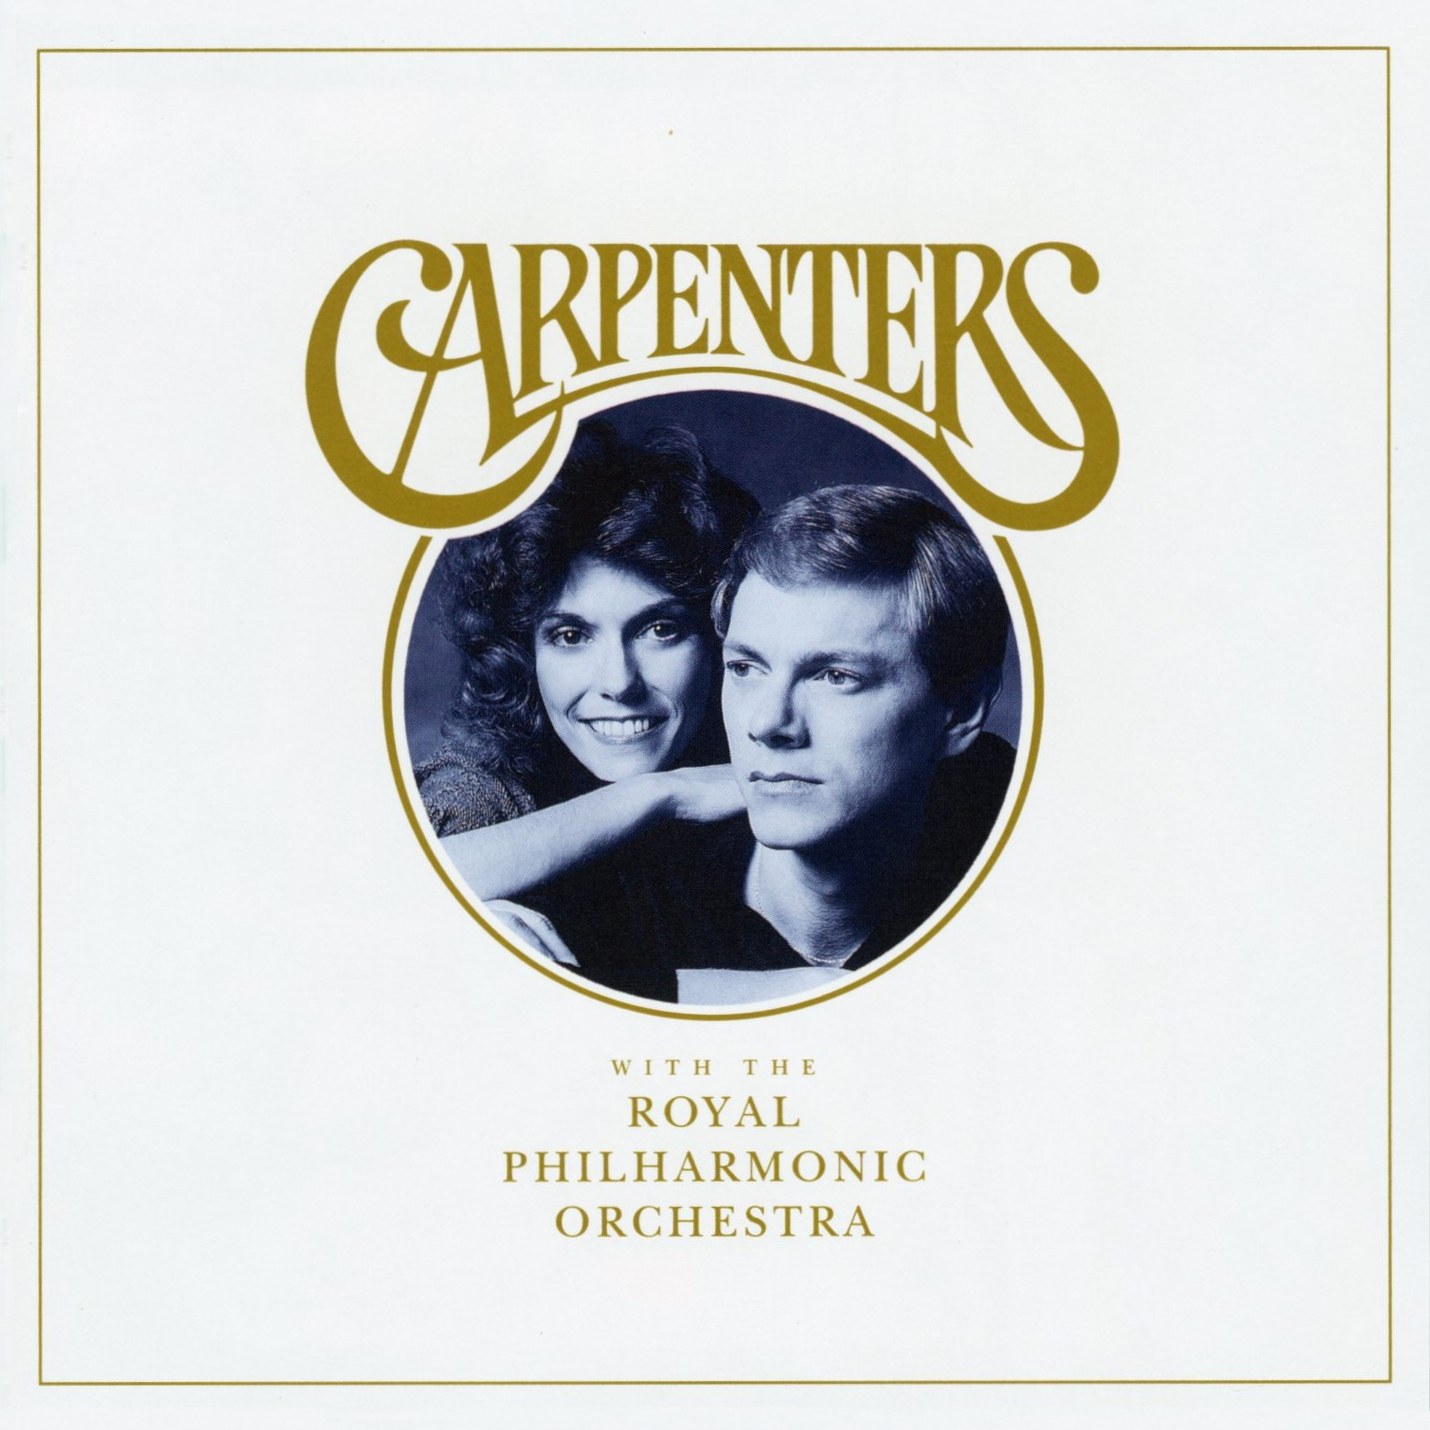 Carpenters With The Royal Philharmonic Orchestra (2018) FLAC+MP3